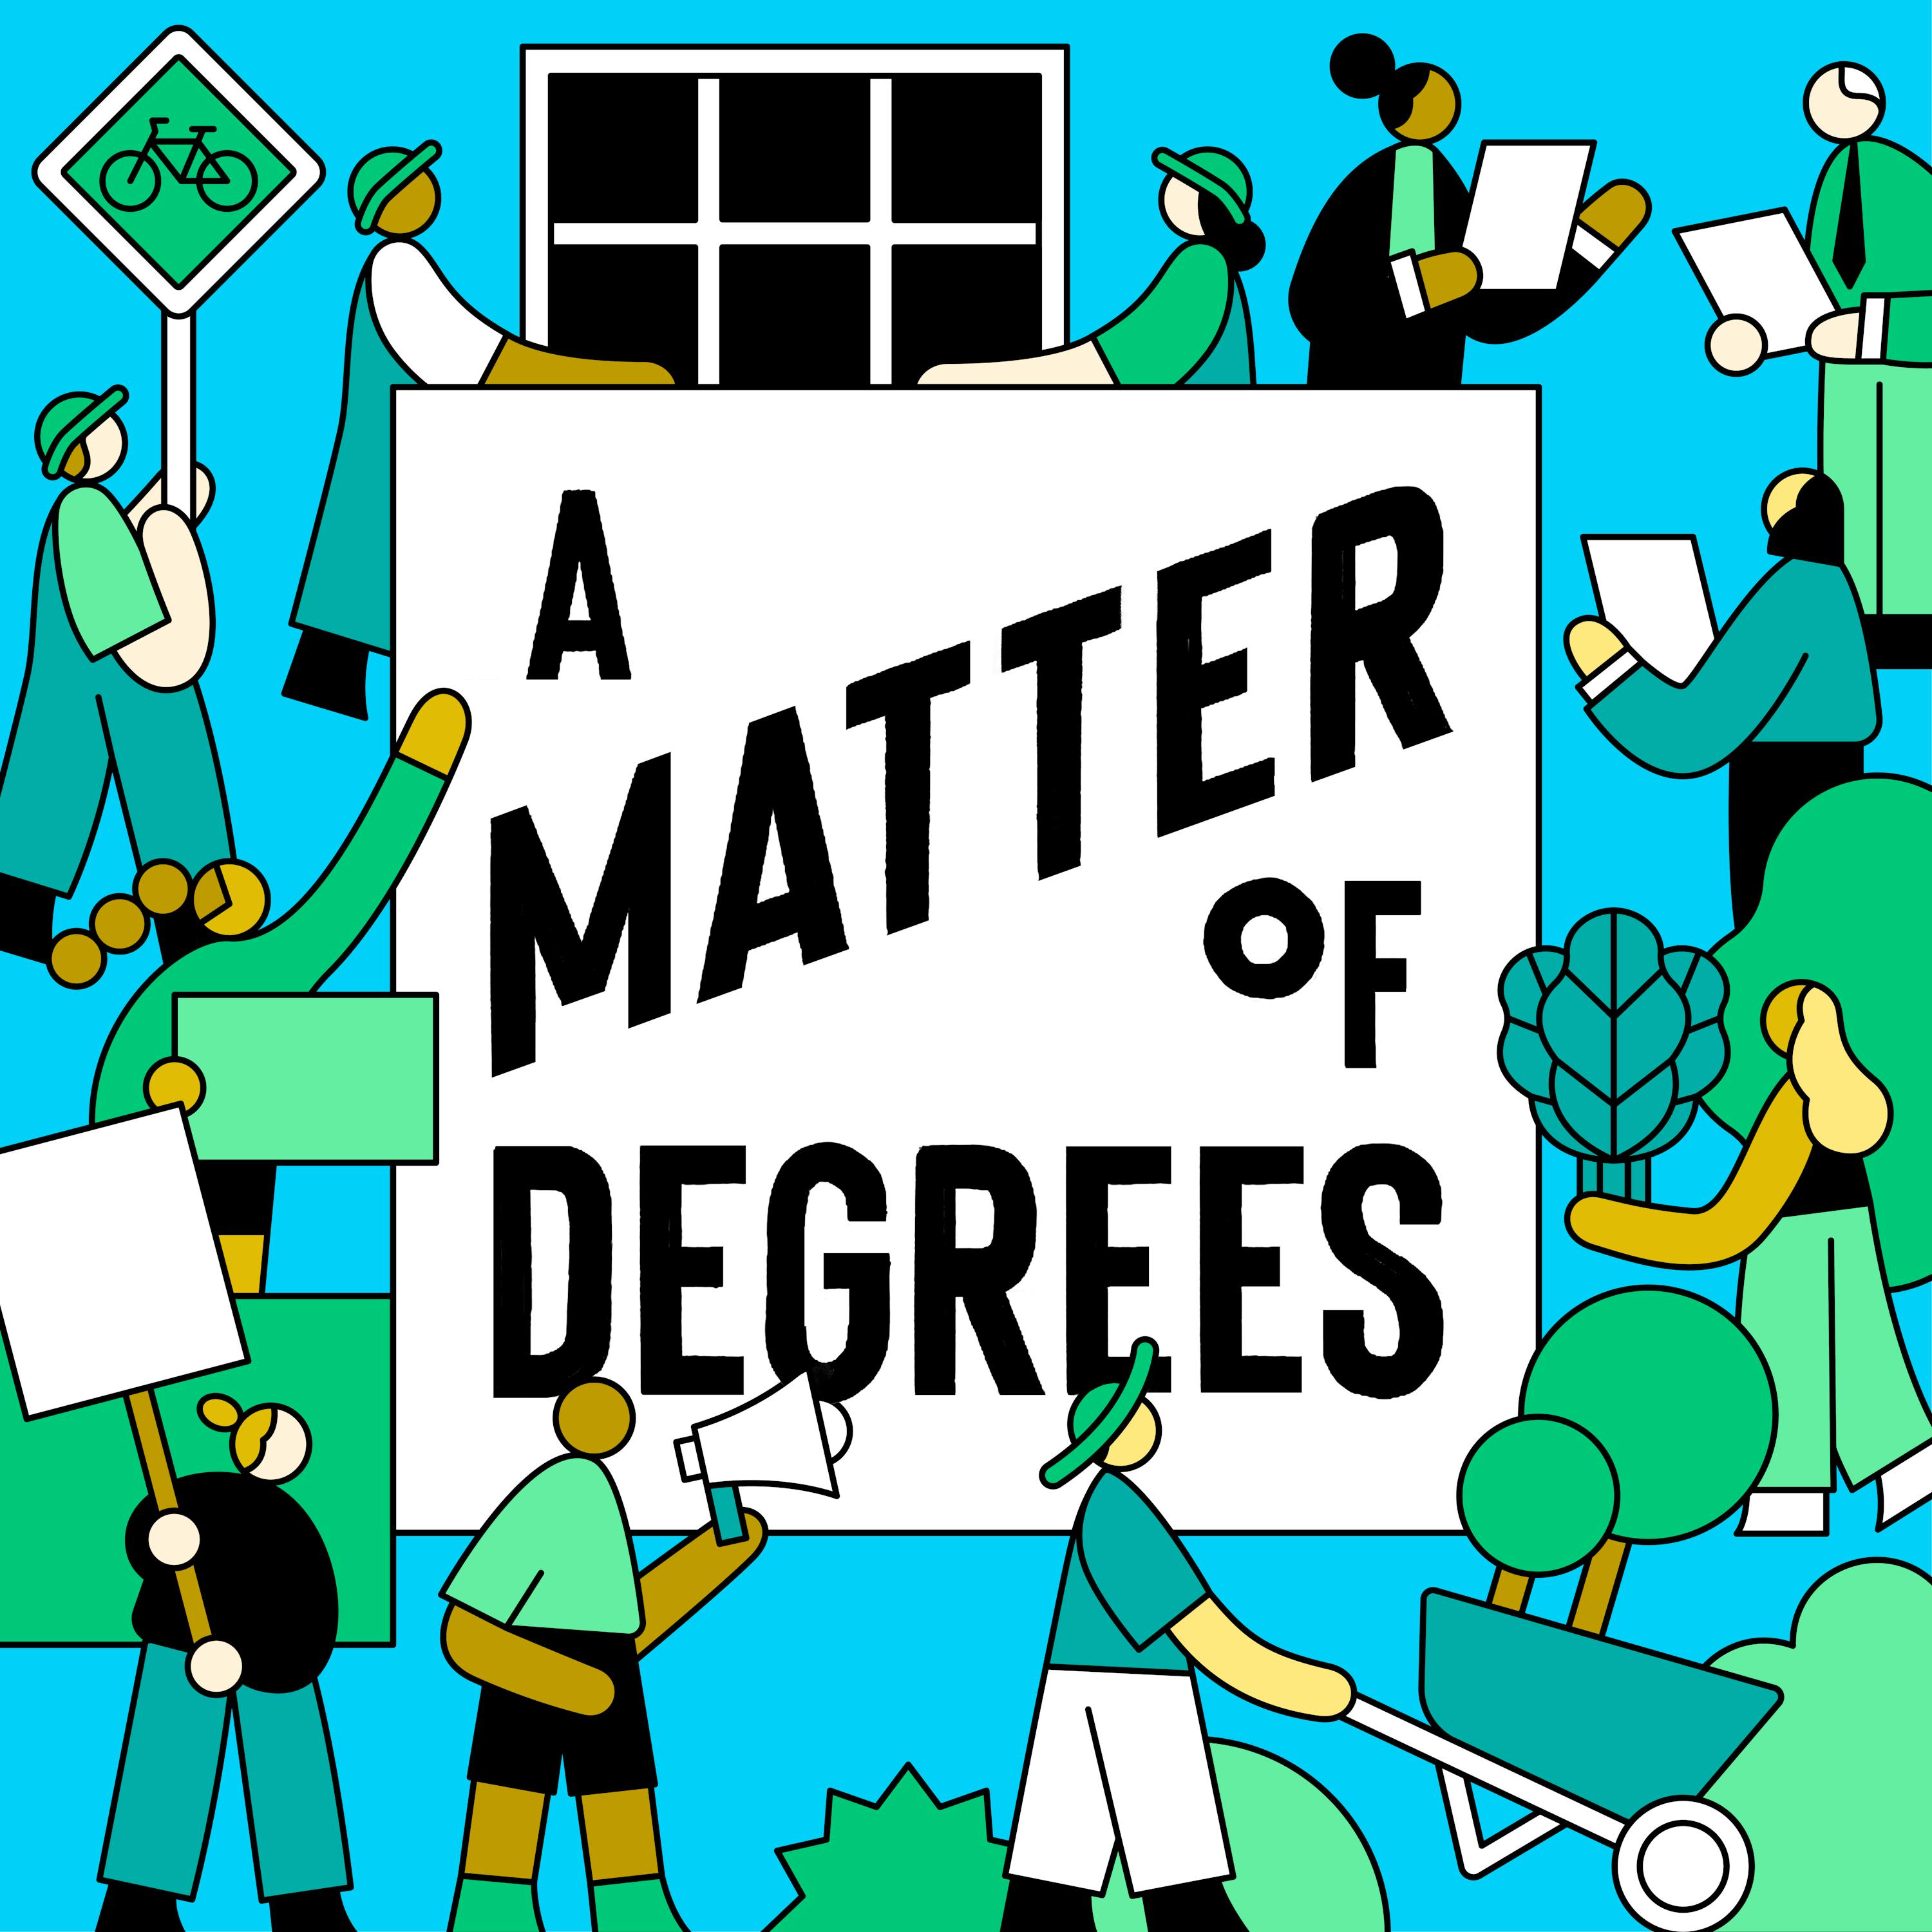 Welcome to Season 3 of A Matter of Degrees